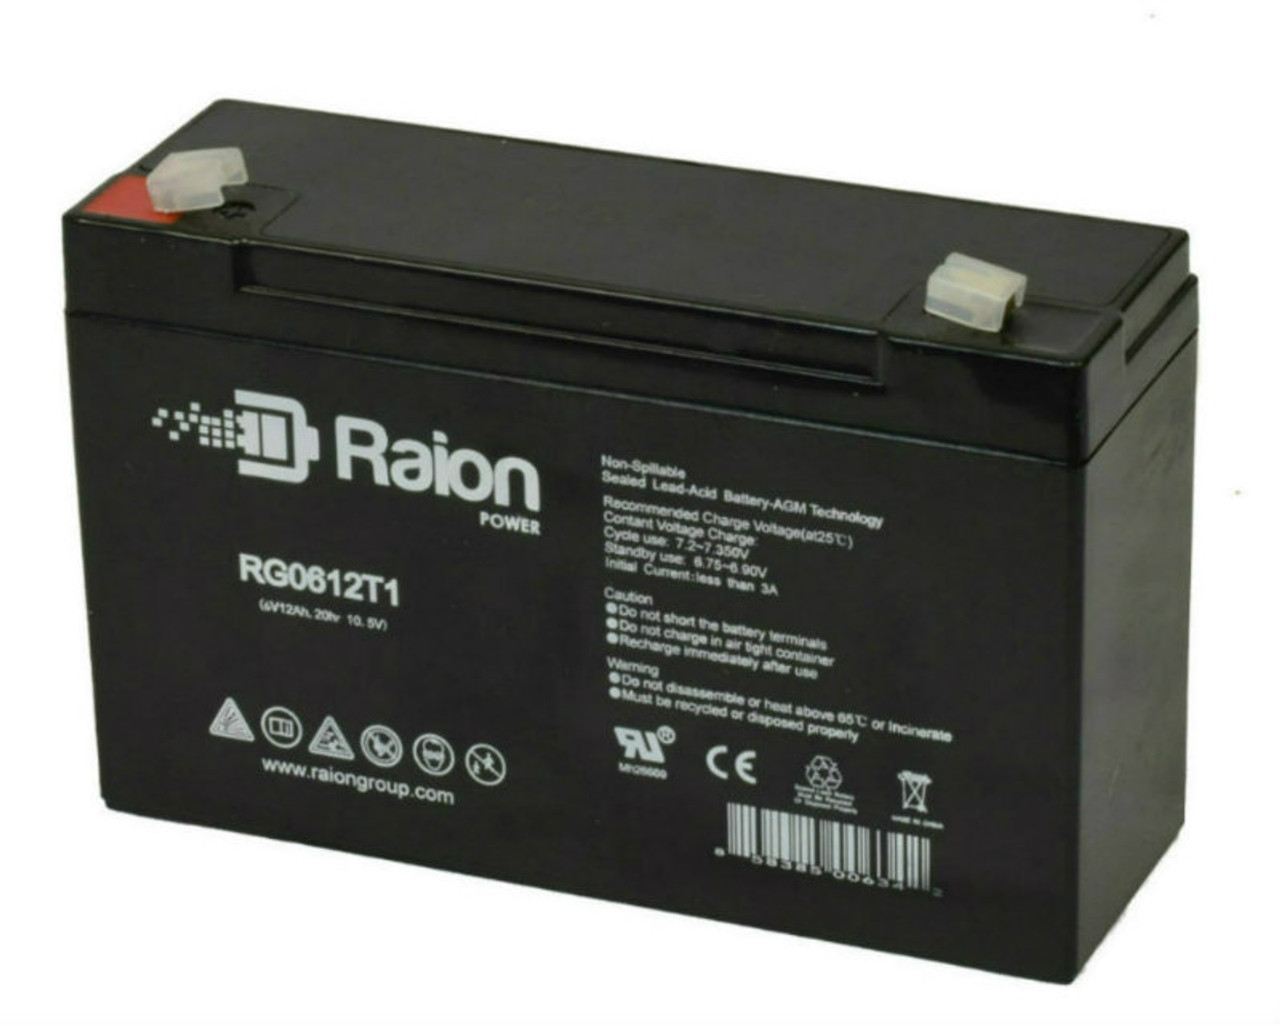 Raion Power RG06120T1 Replacement Battery for Kaufel 2078